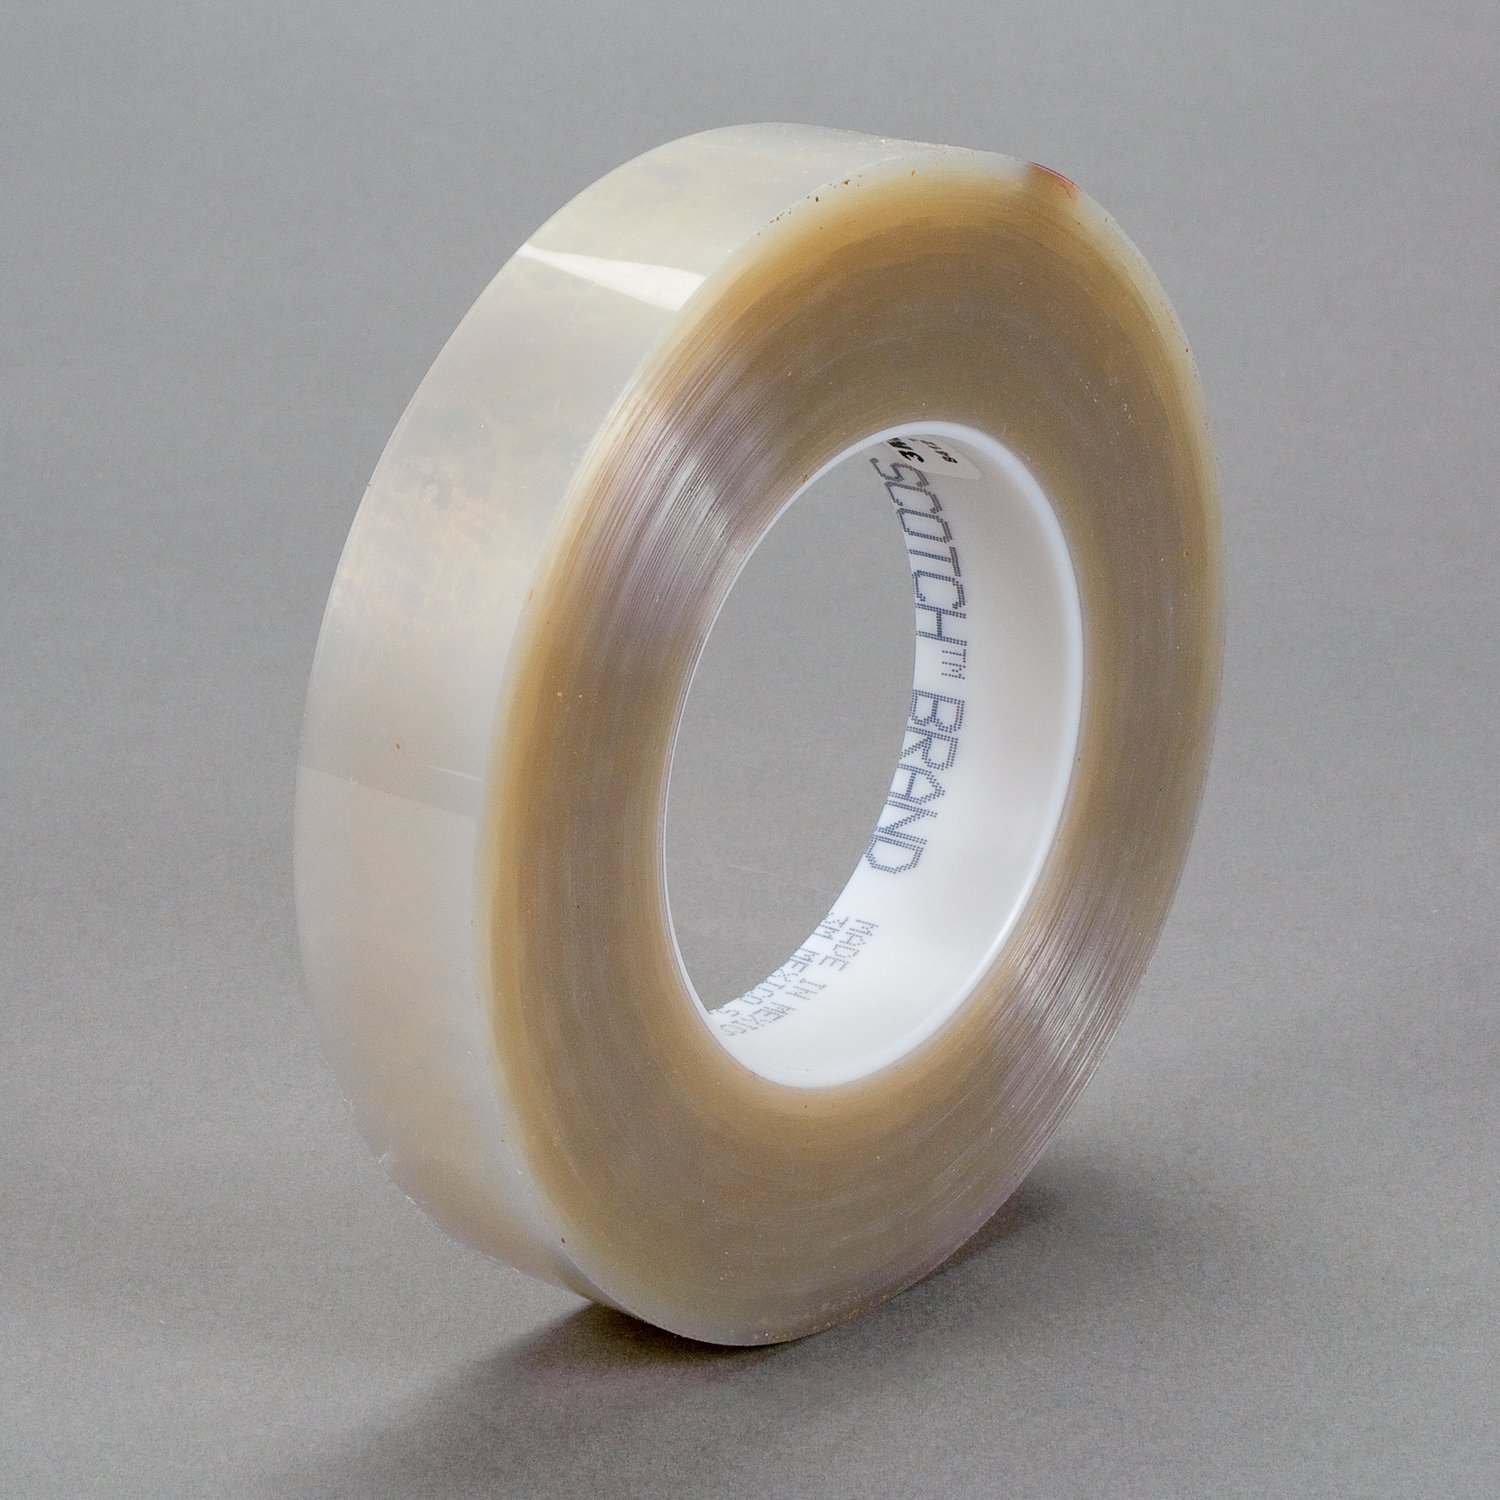 7000048390 - 3M Polyester Tape 8412, Transparent, 1 in x 72 yd, 6.3 mil, 36 rolls
per case